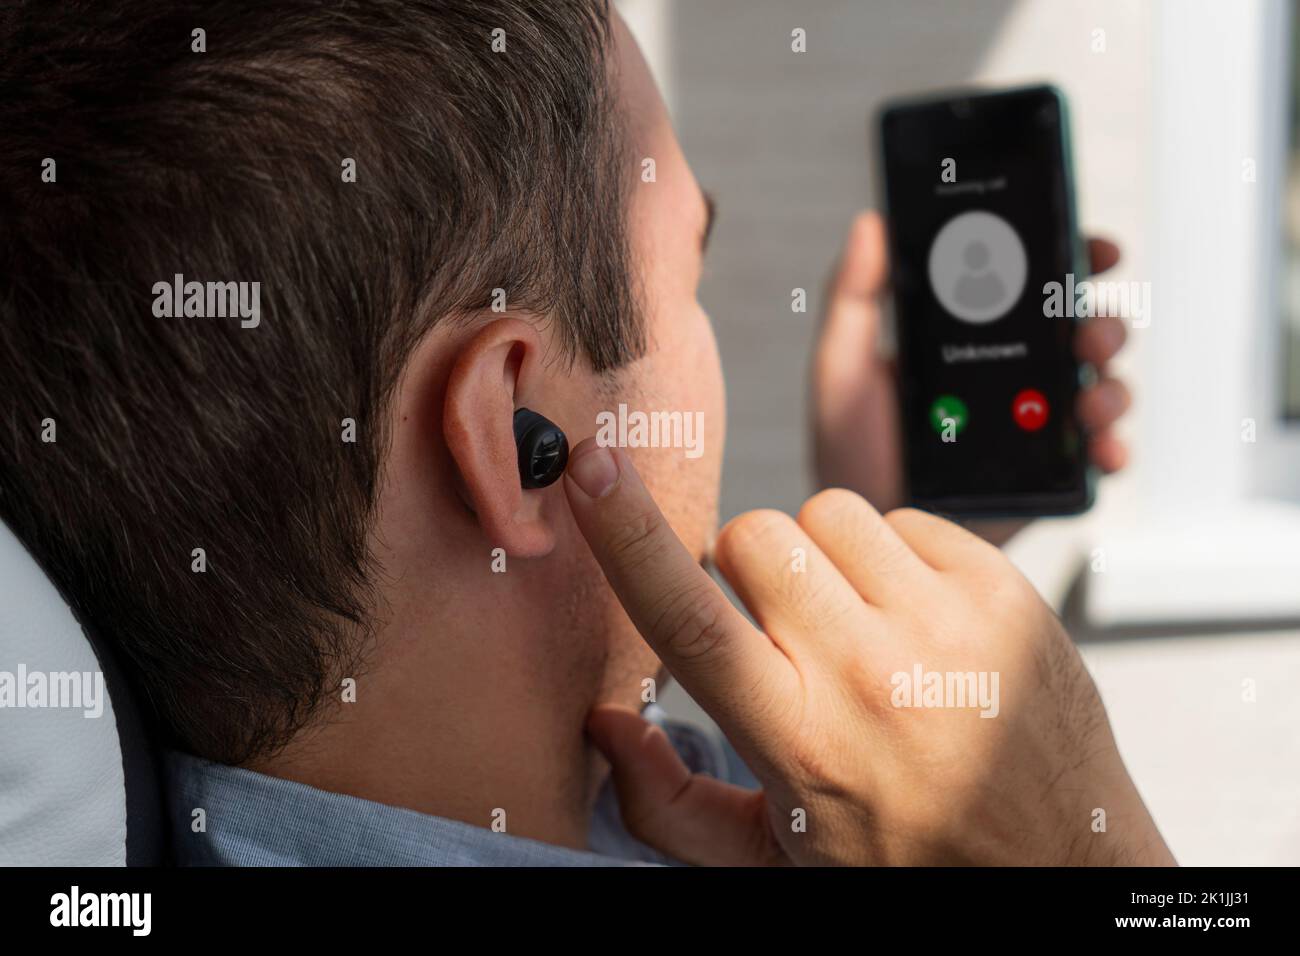 a young businessman man receives an incoming call on a smartphone using a wireless earphone Stock Photo